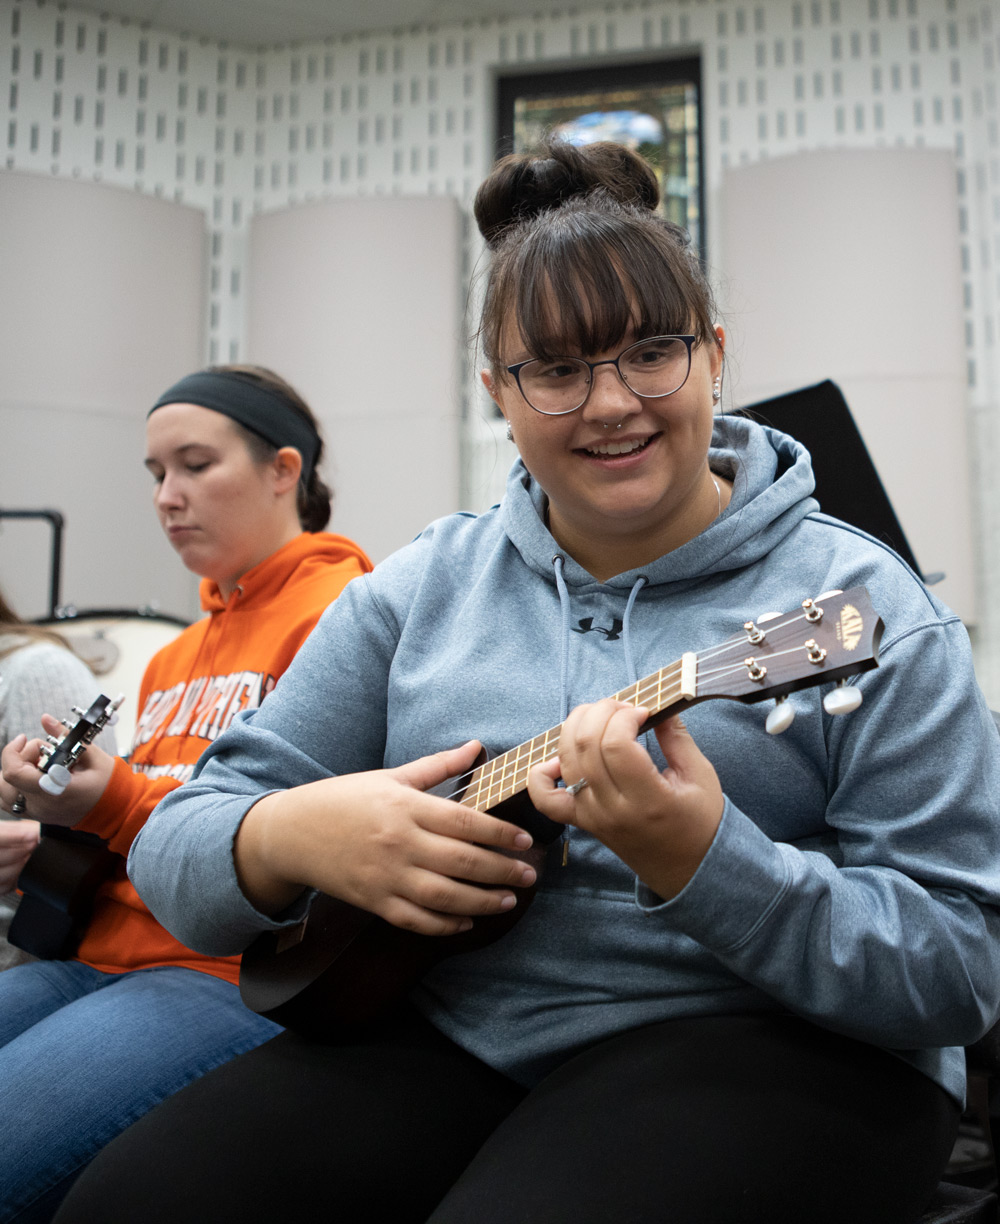 Students work on integrated music methods during a music education class.